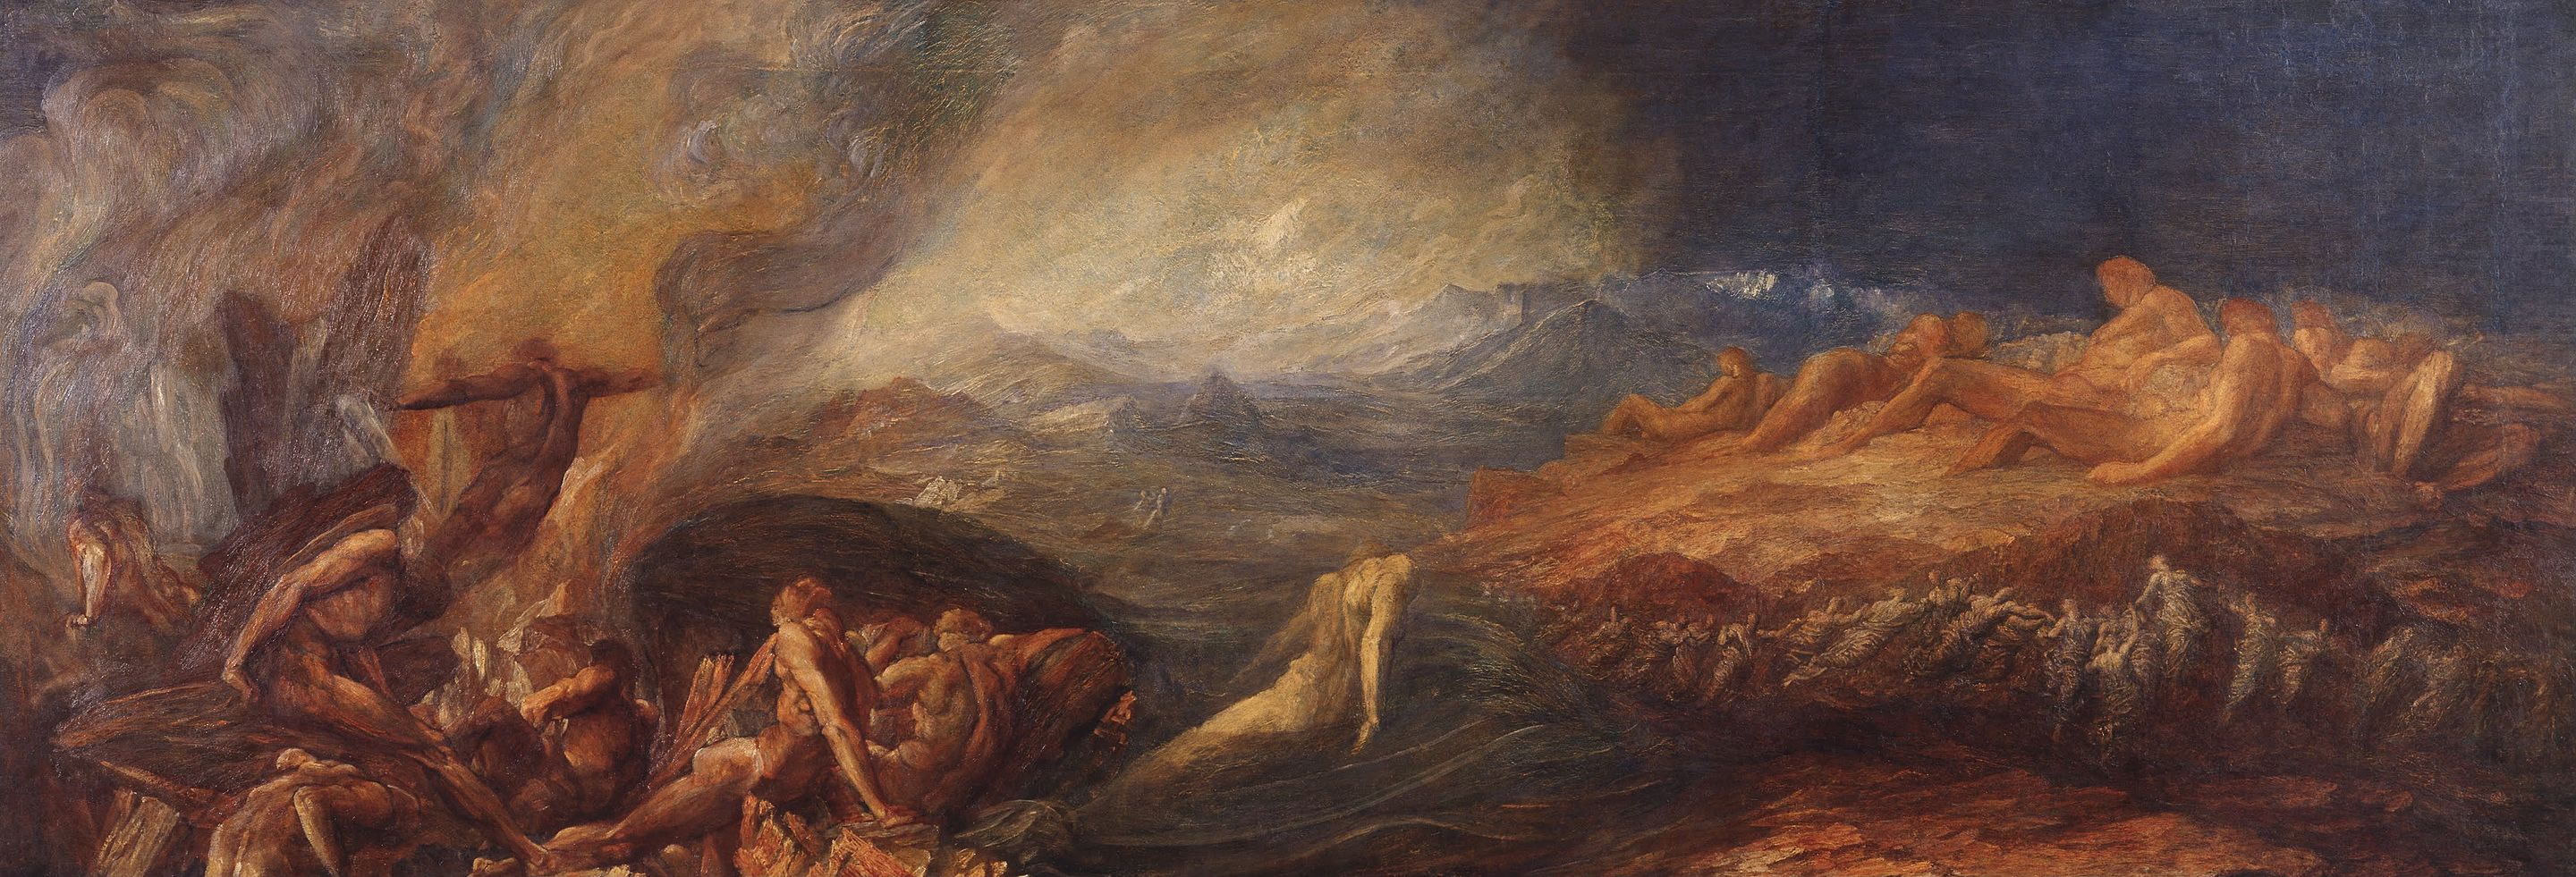 George Frederic Watts - Chaos